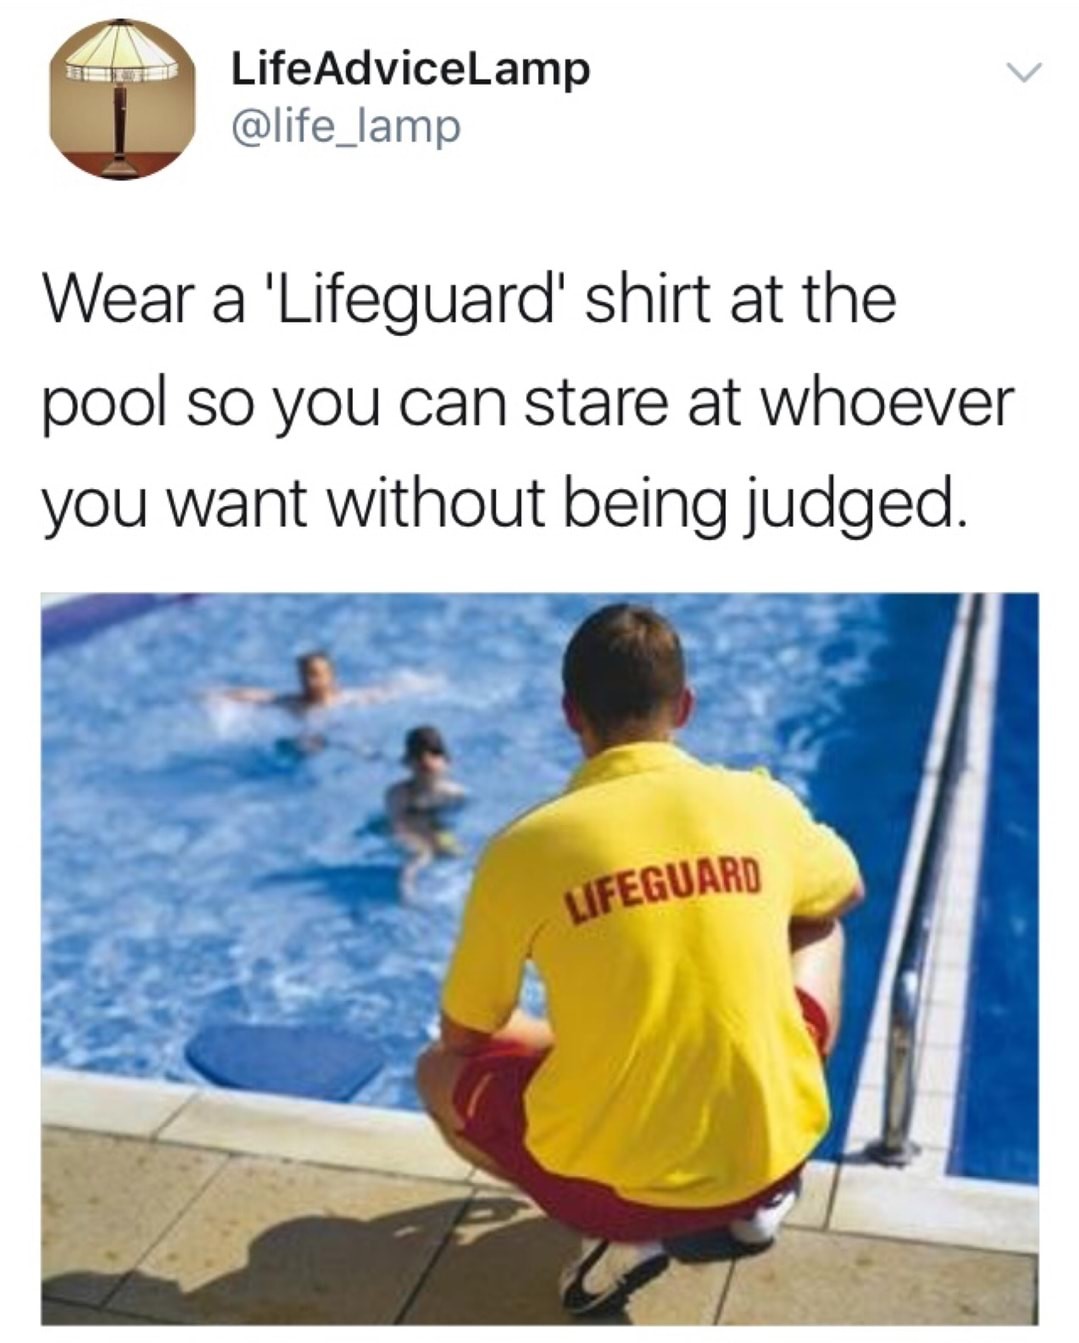 meme stream - swimming pool lifeguard - Life AdviceLamp Wear a 'Lifeguard' shirt at the pool so you can stare at whoever you want without being judged. Ufeguard